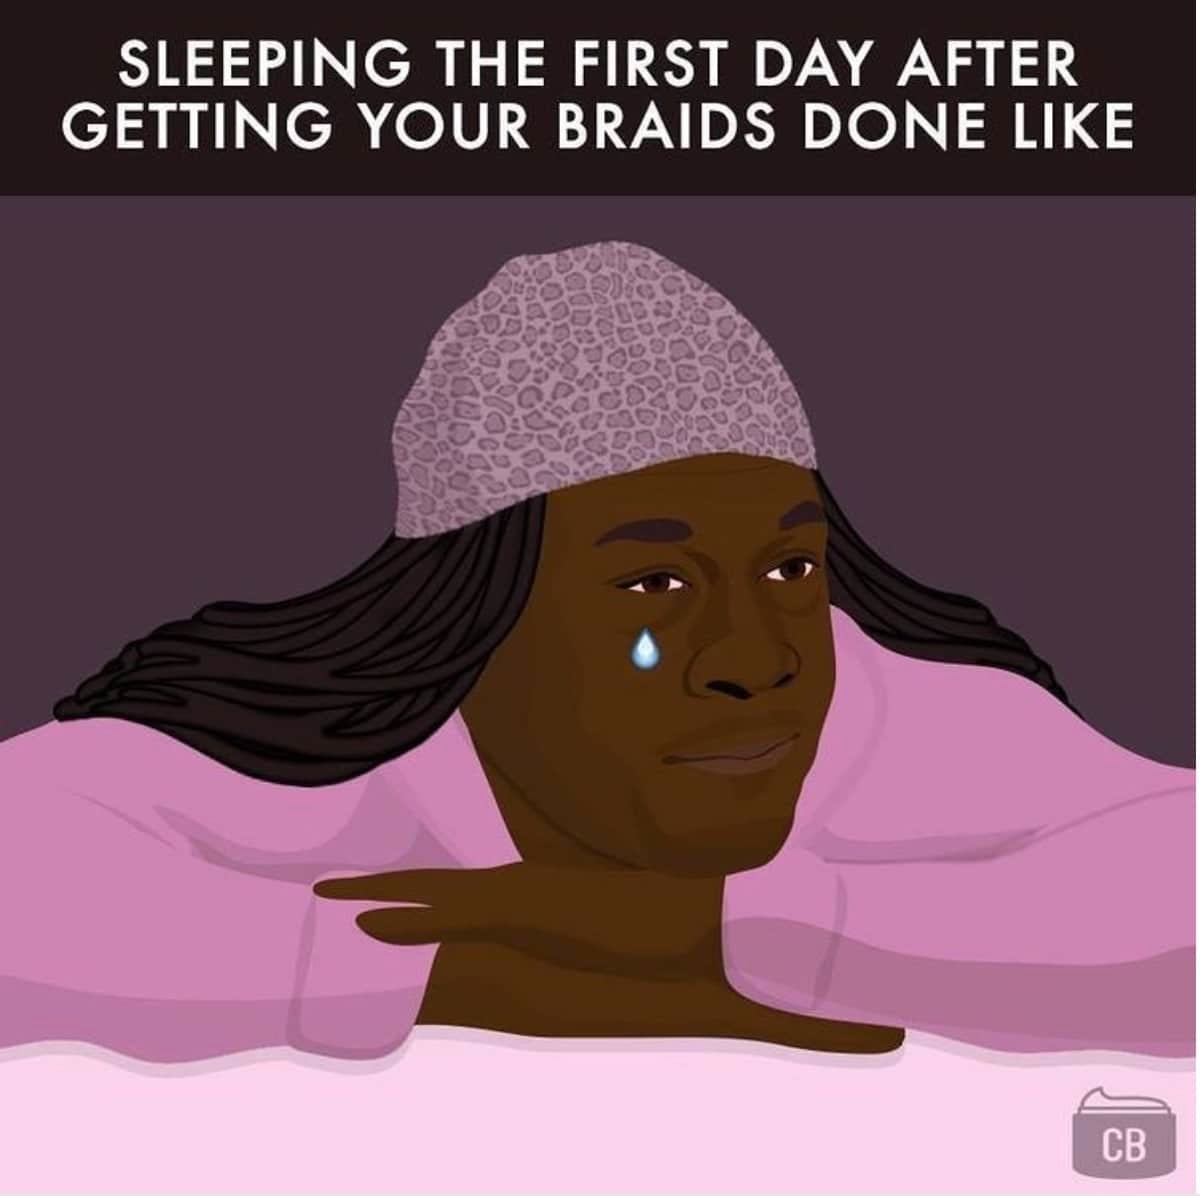 25 Hair Memes Every Black Woman Can Relate To